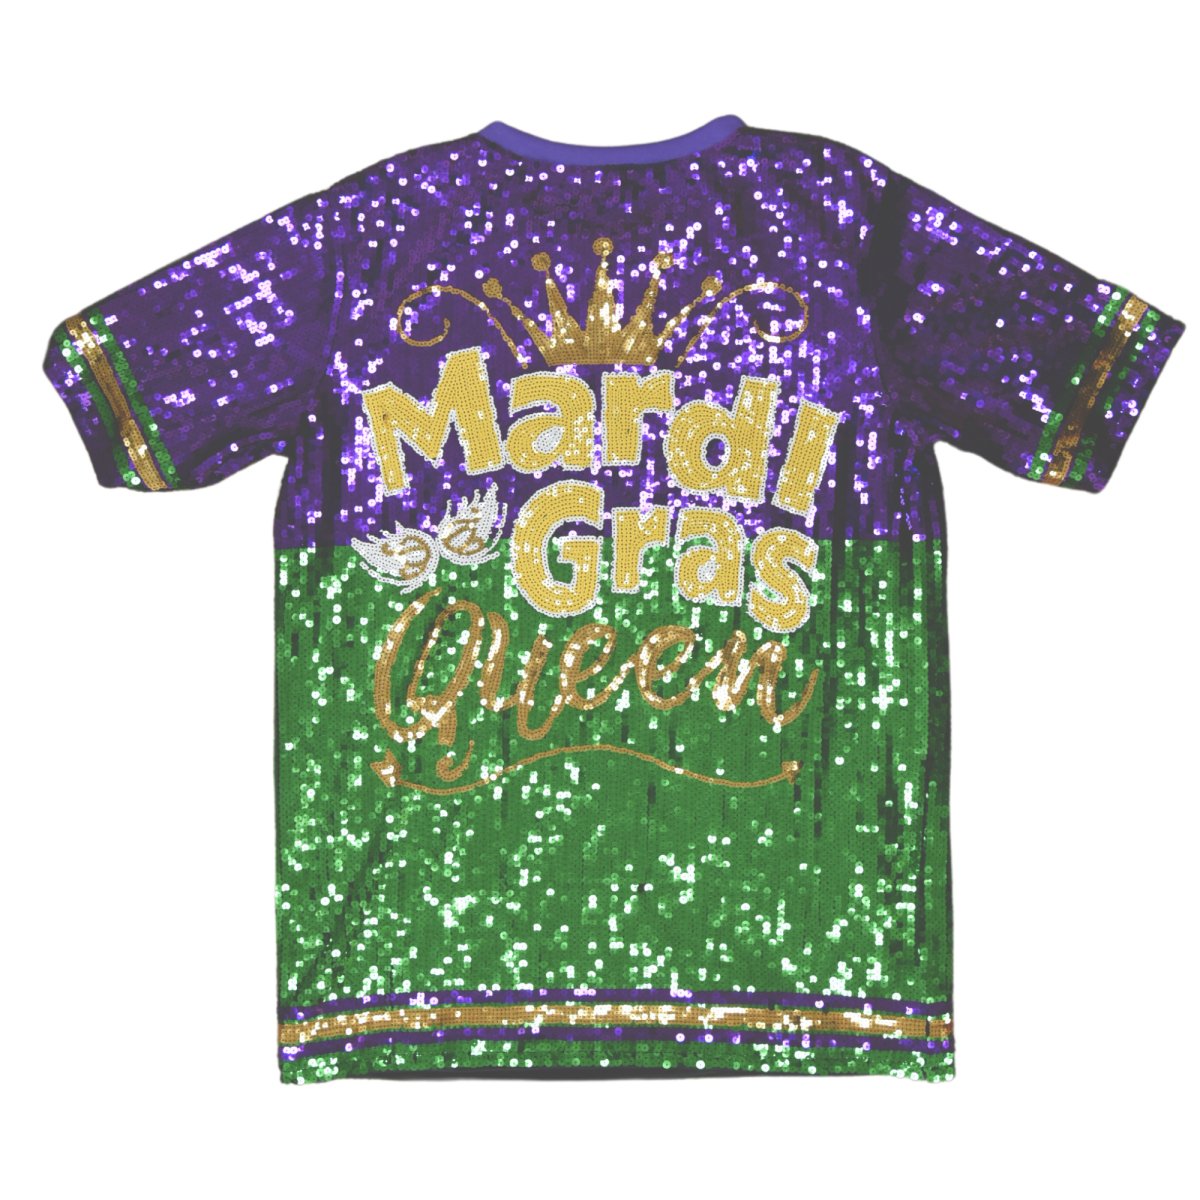 Trim Lettered Green Apparel - & Dress Purple, Yellow, With Gras SEQUIN Mardi